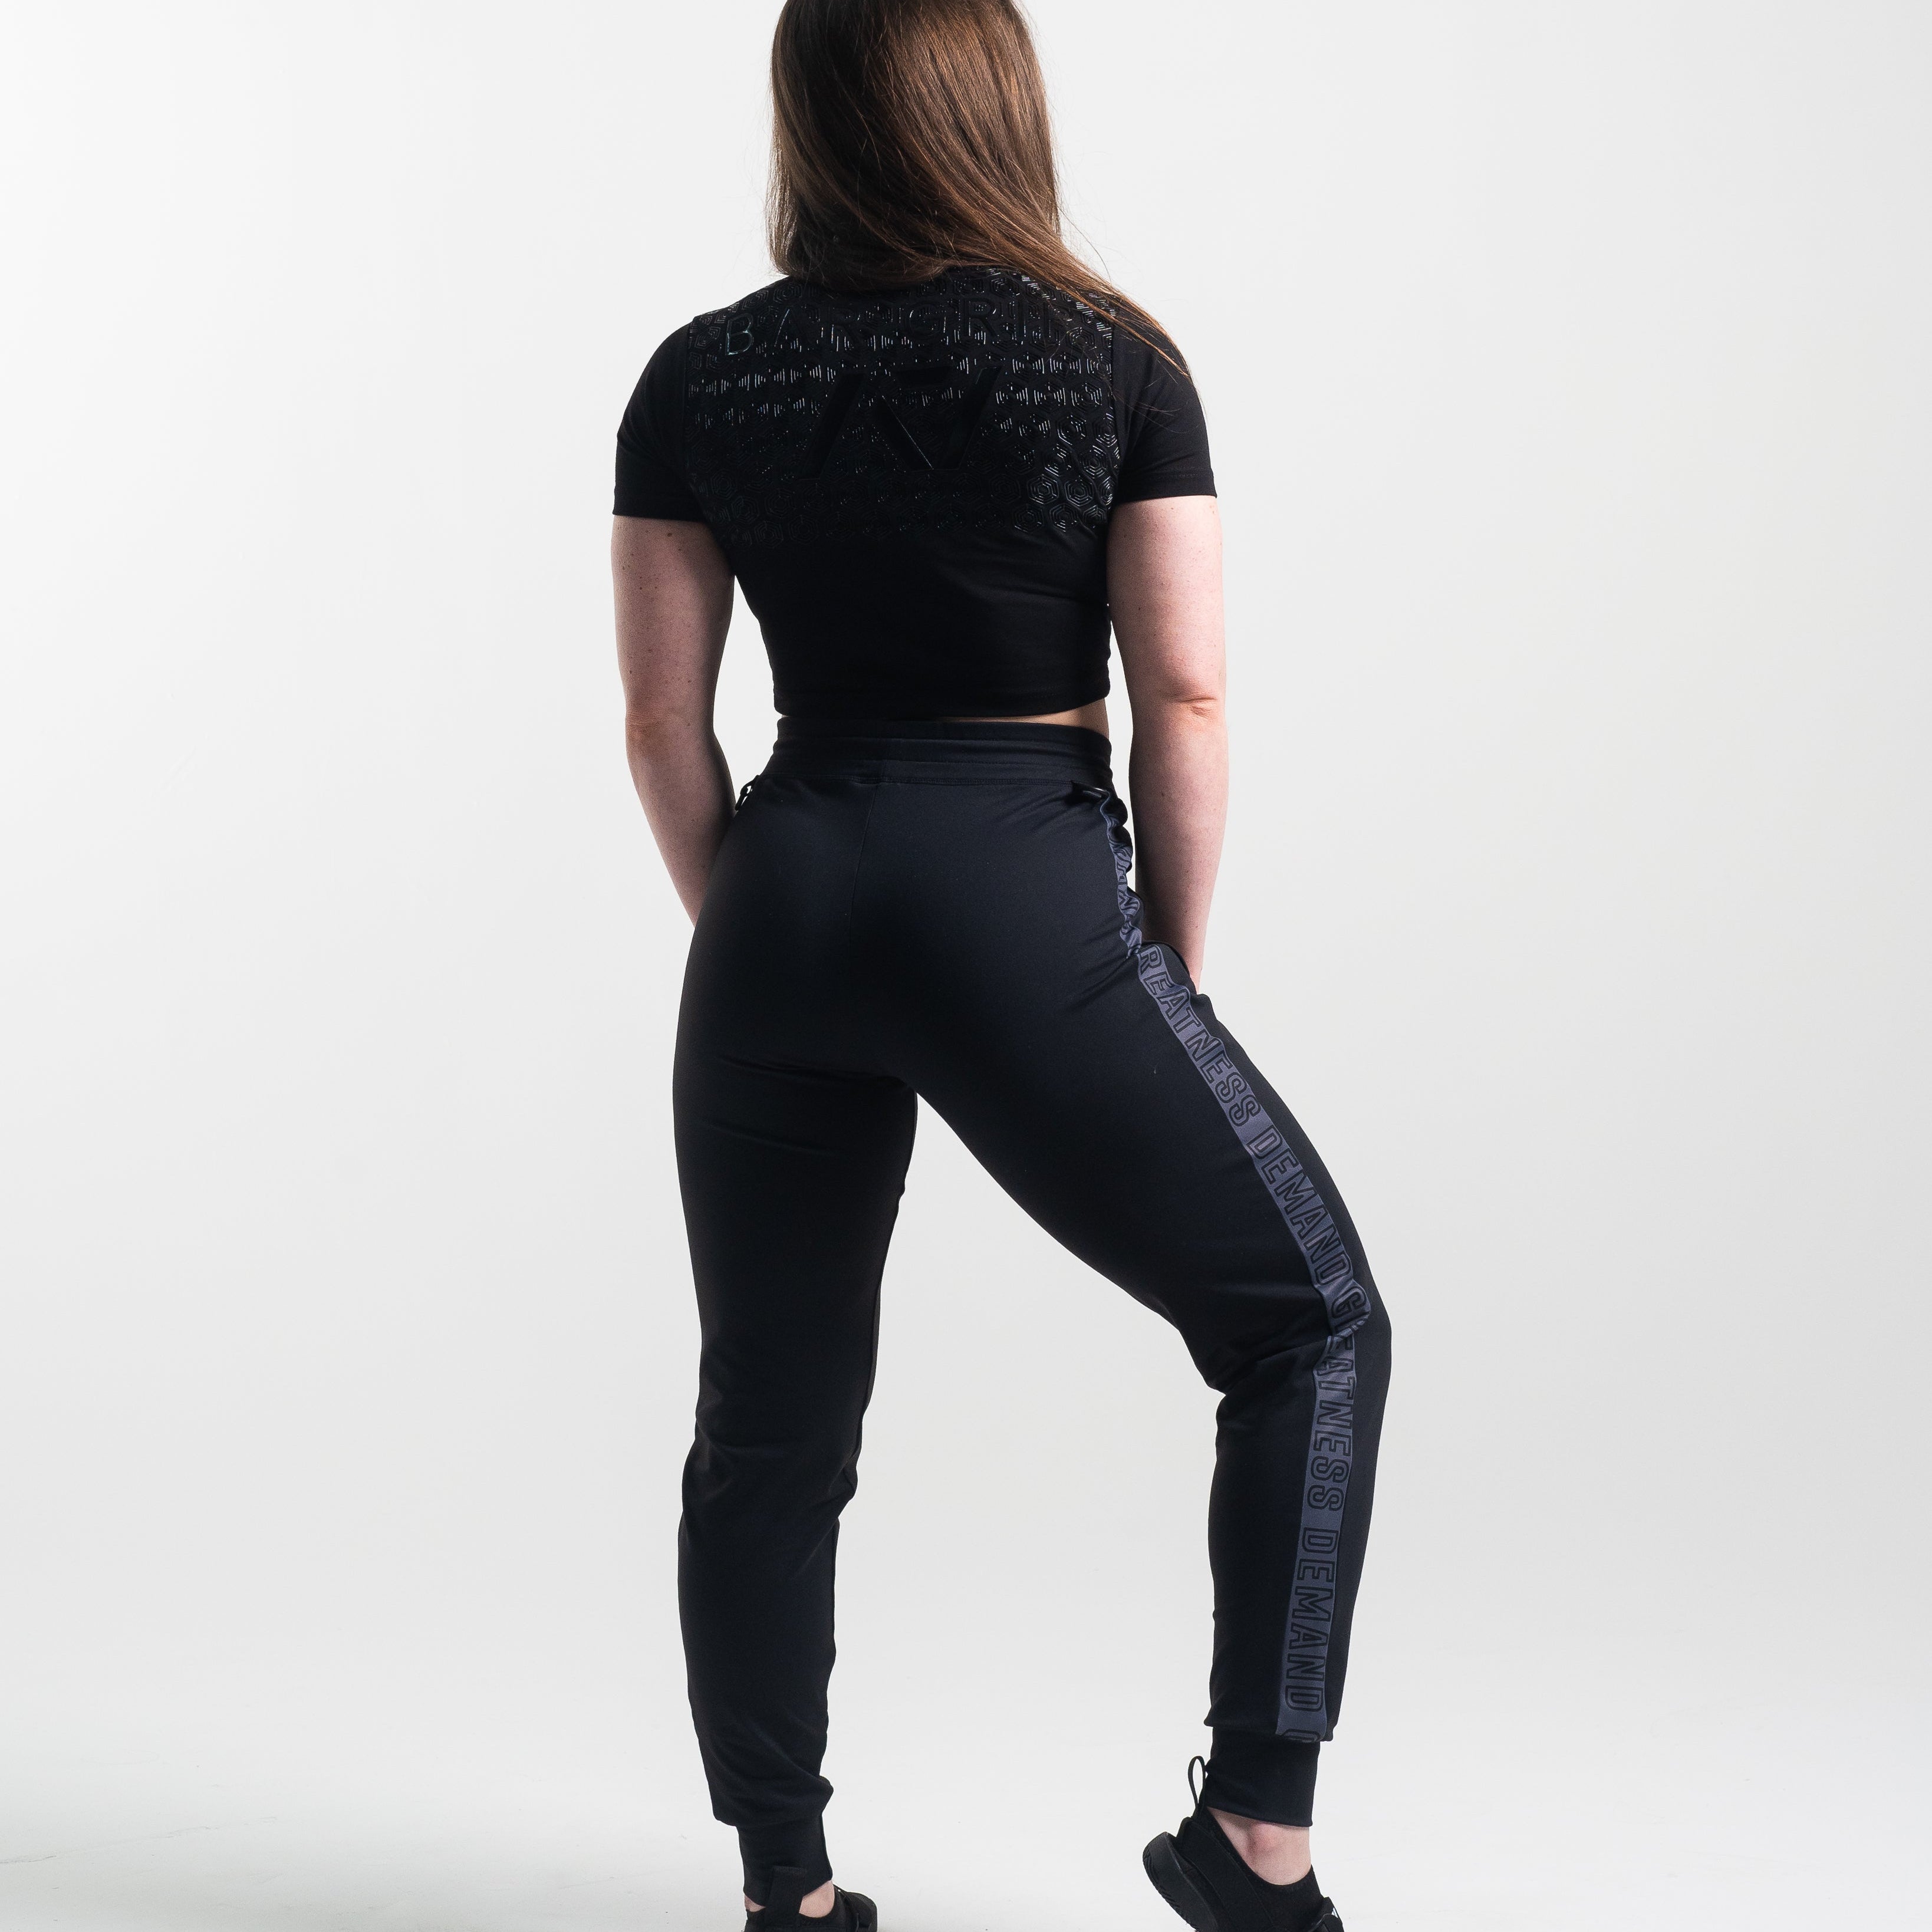 A7 Shadow Stone Defy joggers are just as comfortable in the gym as they are going out. These are made with premium moisture-wicking 4-way-stretch material for greater range of motion. These are a great fit for both men and women. All A7 Powerlifting Equipment shipping to France, Spain, Ireland, Germany, Italy, Sweden and EU. 